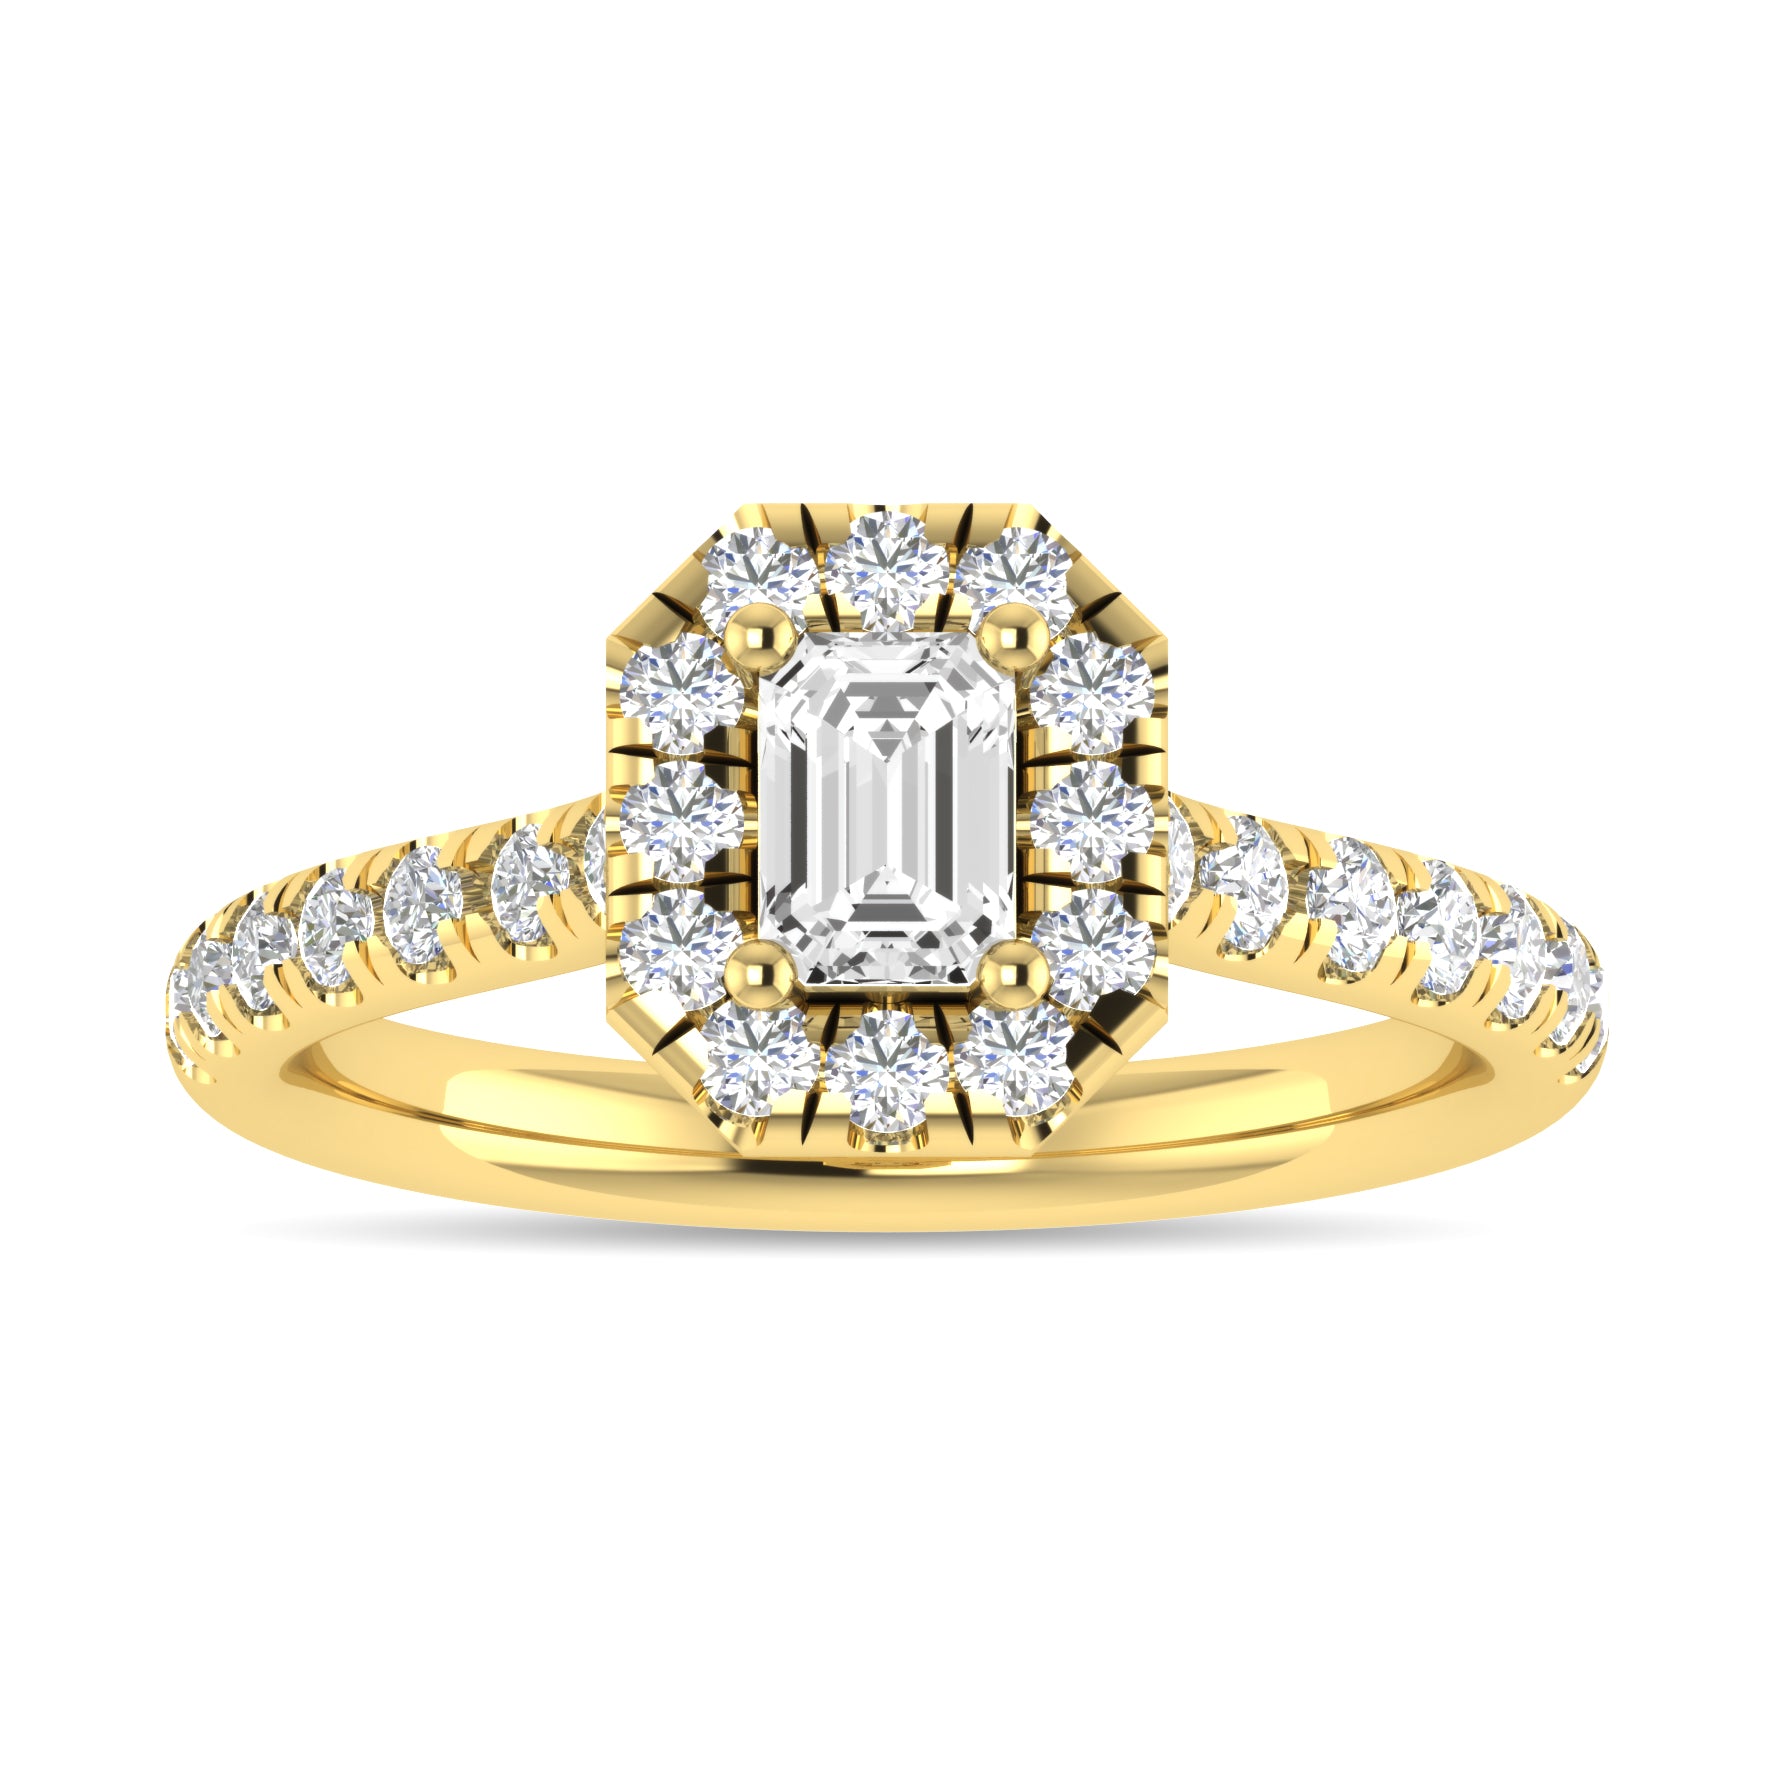 Diamond 1 Ct.Tw. Emerald Shape Engagement Ring in 10K Yellow Gold